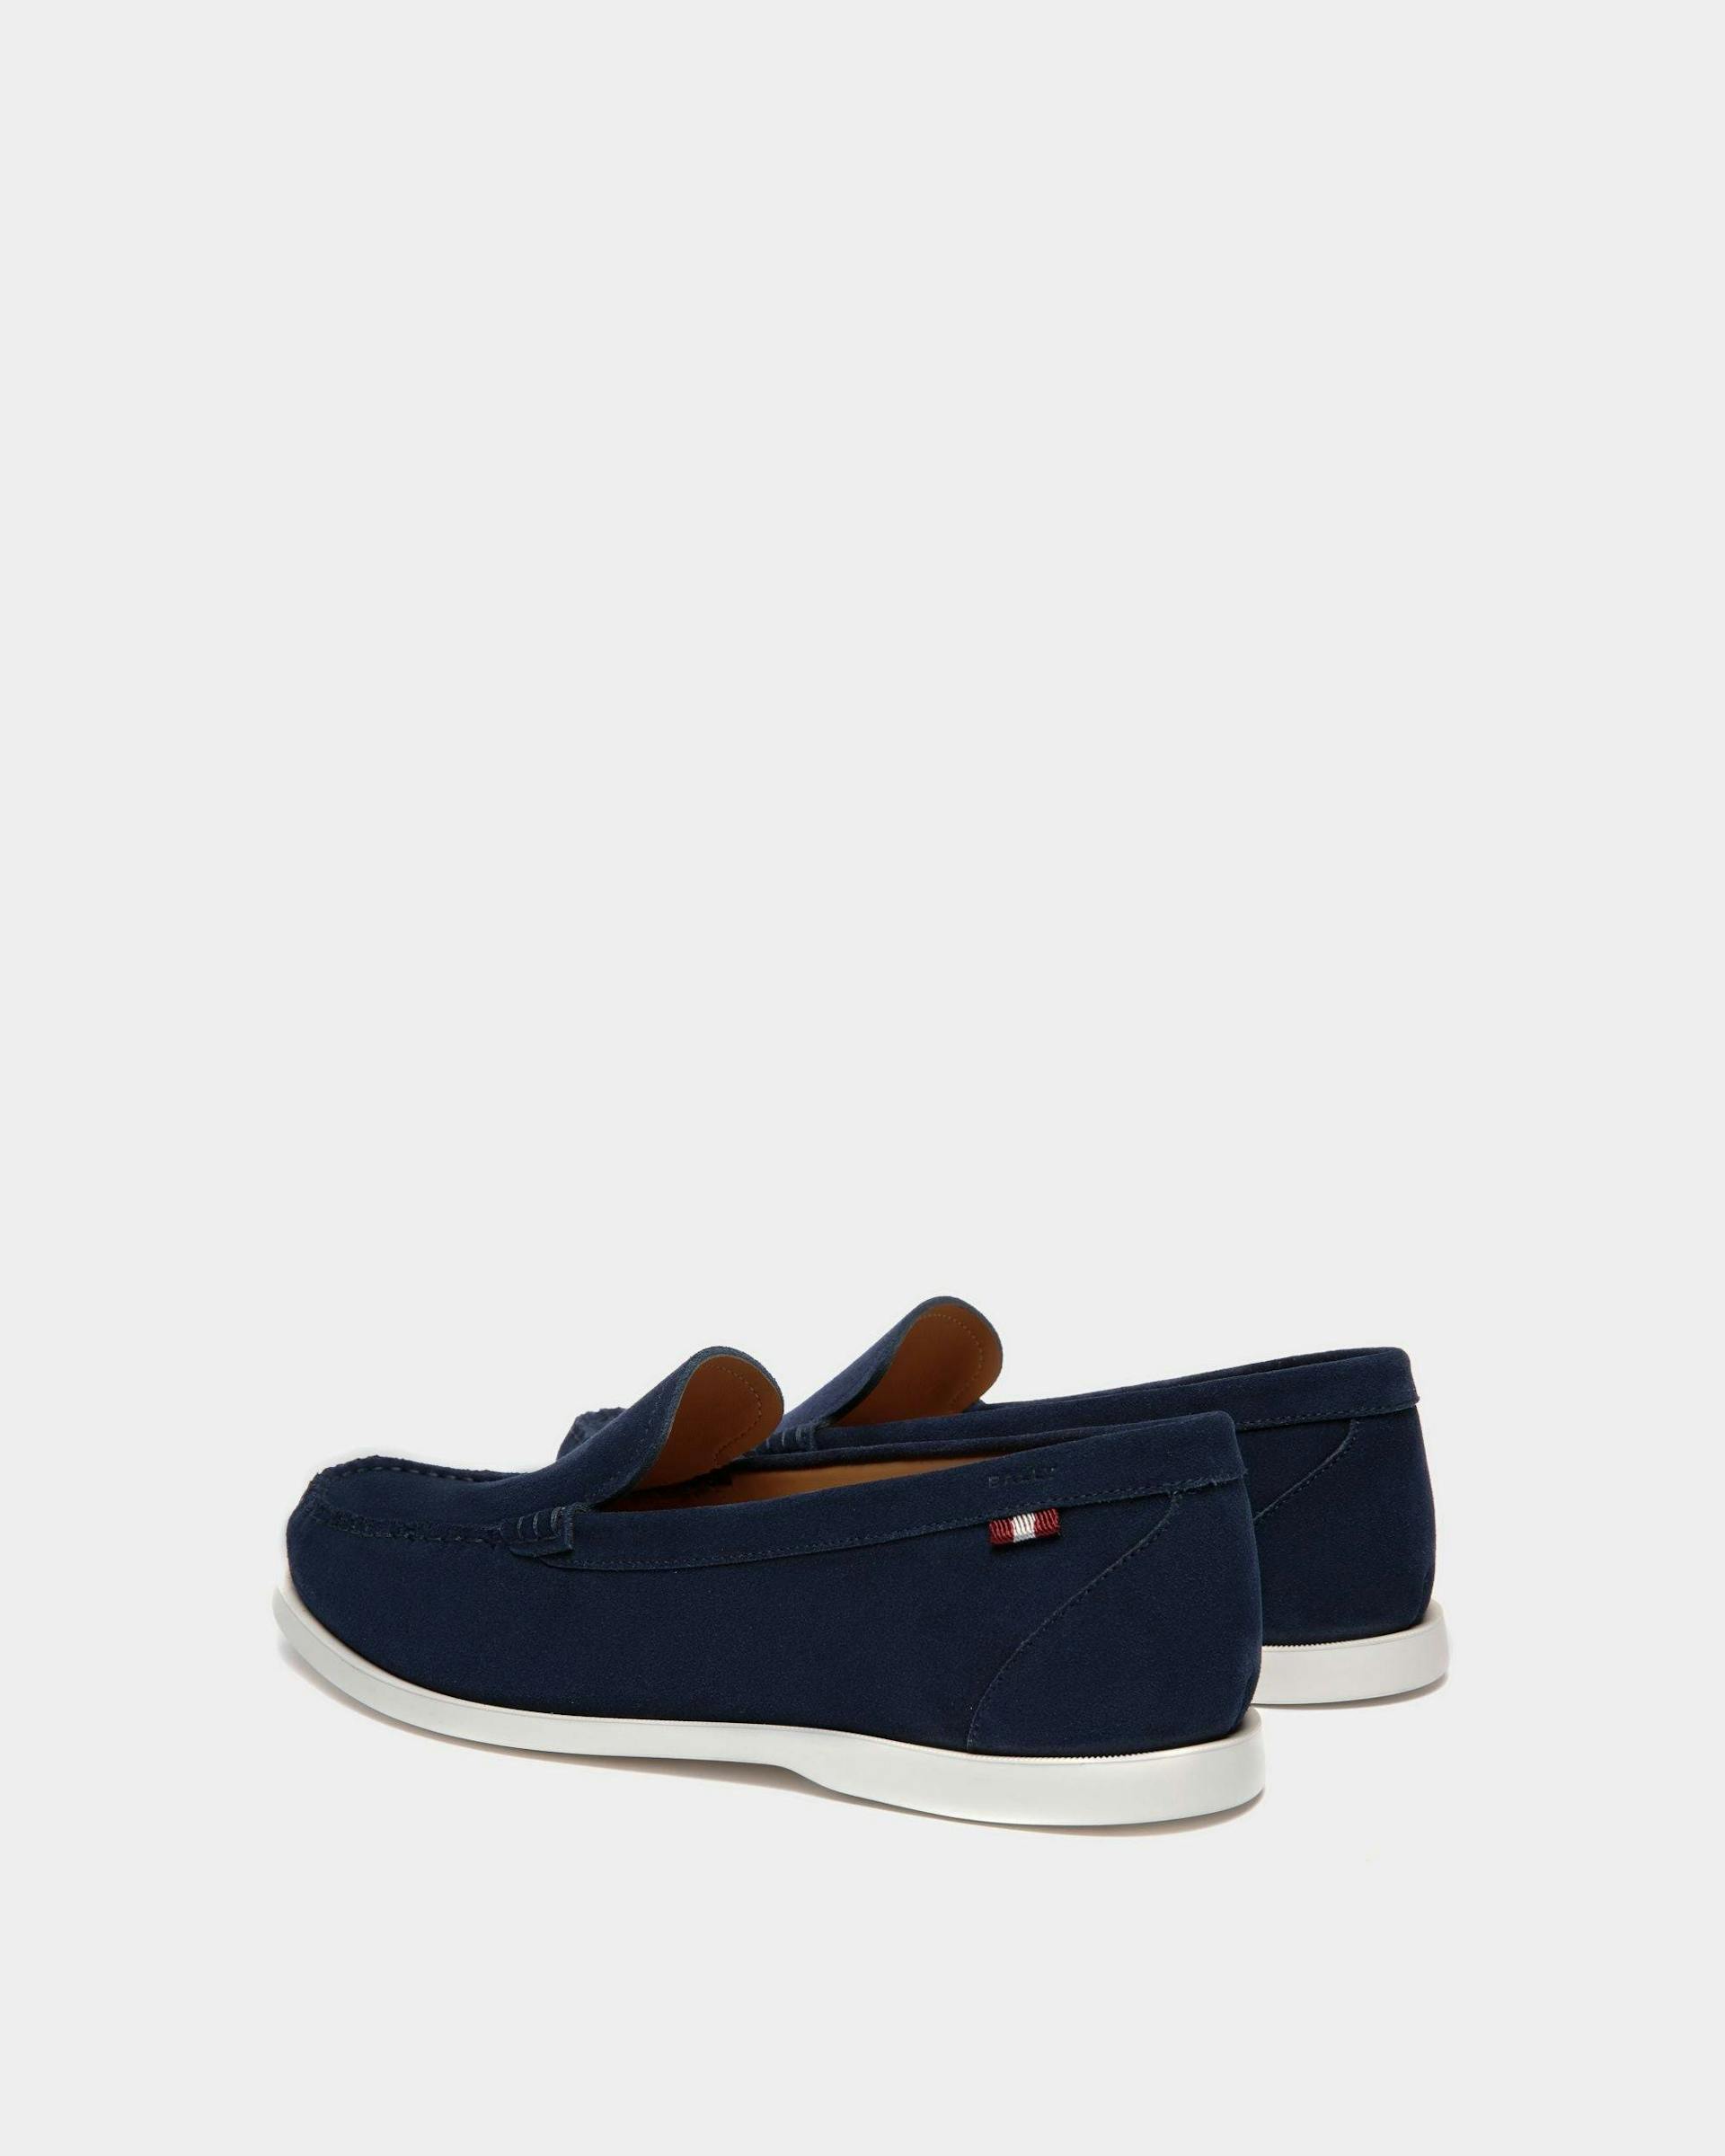 Men's Nelson Loafer in Suede | Bally | Still Life 3/4 Back